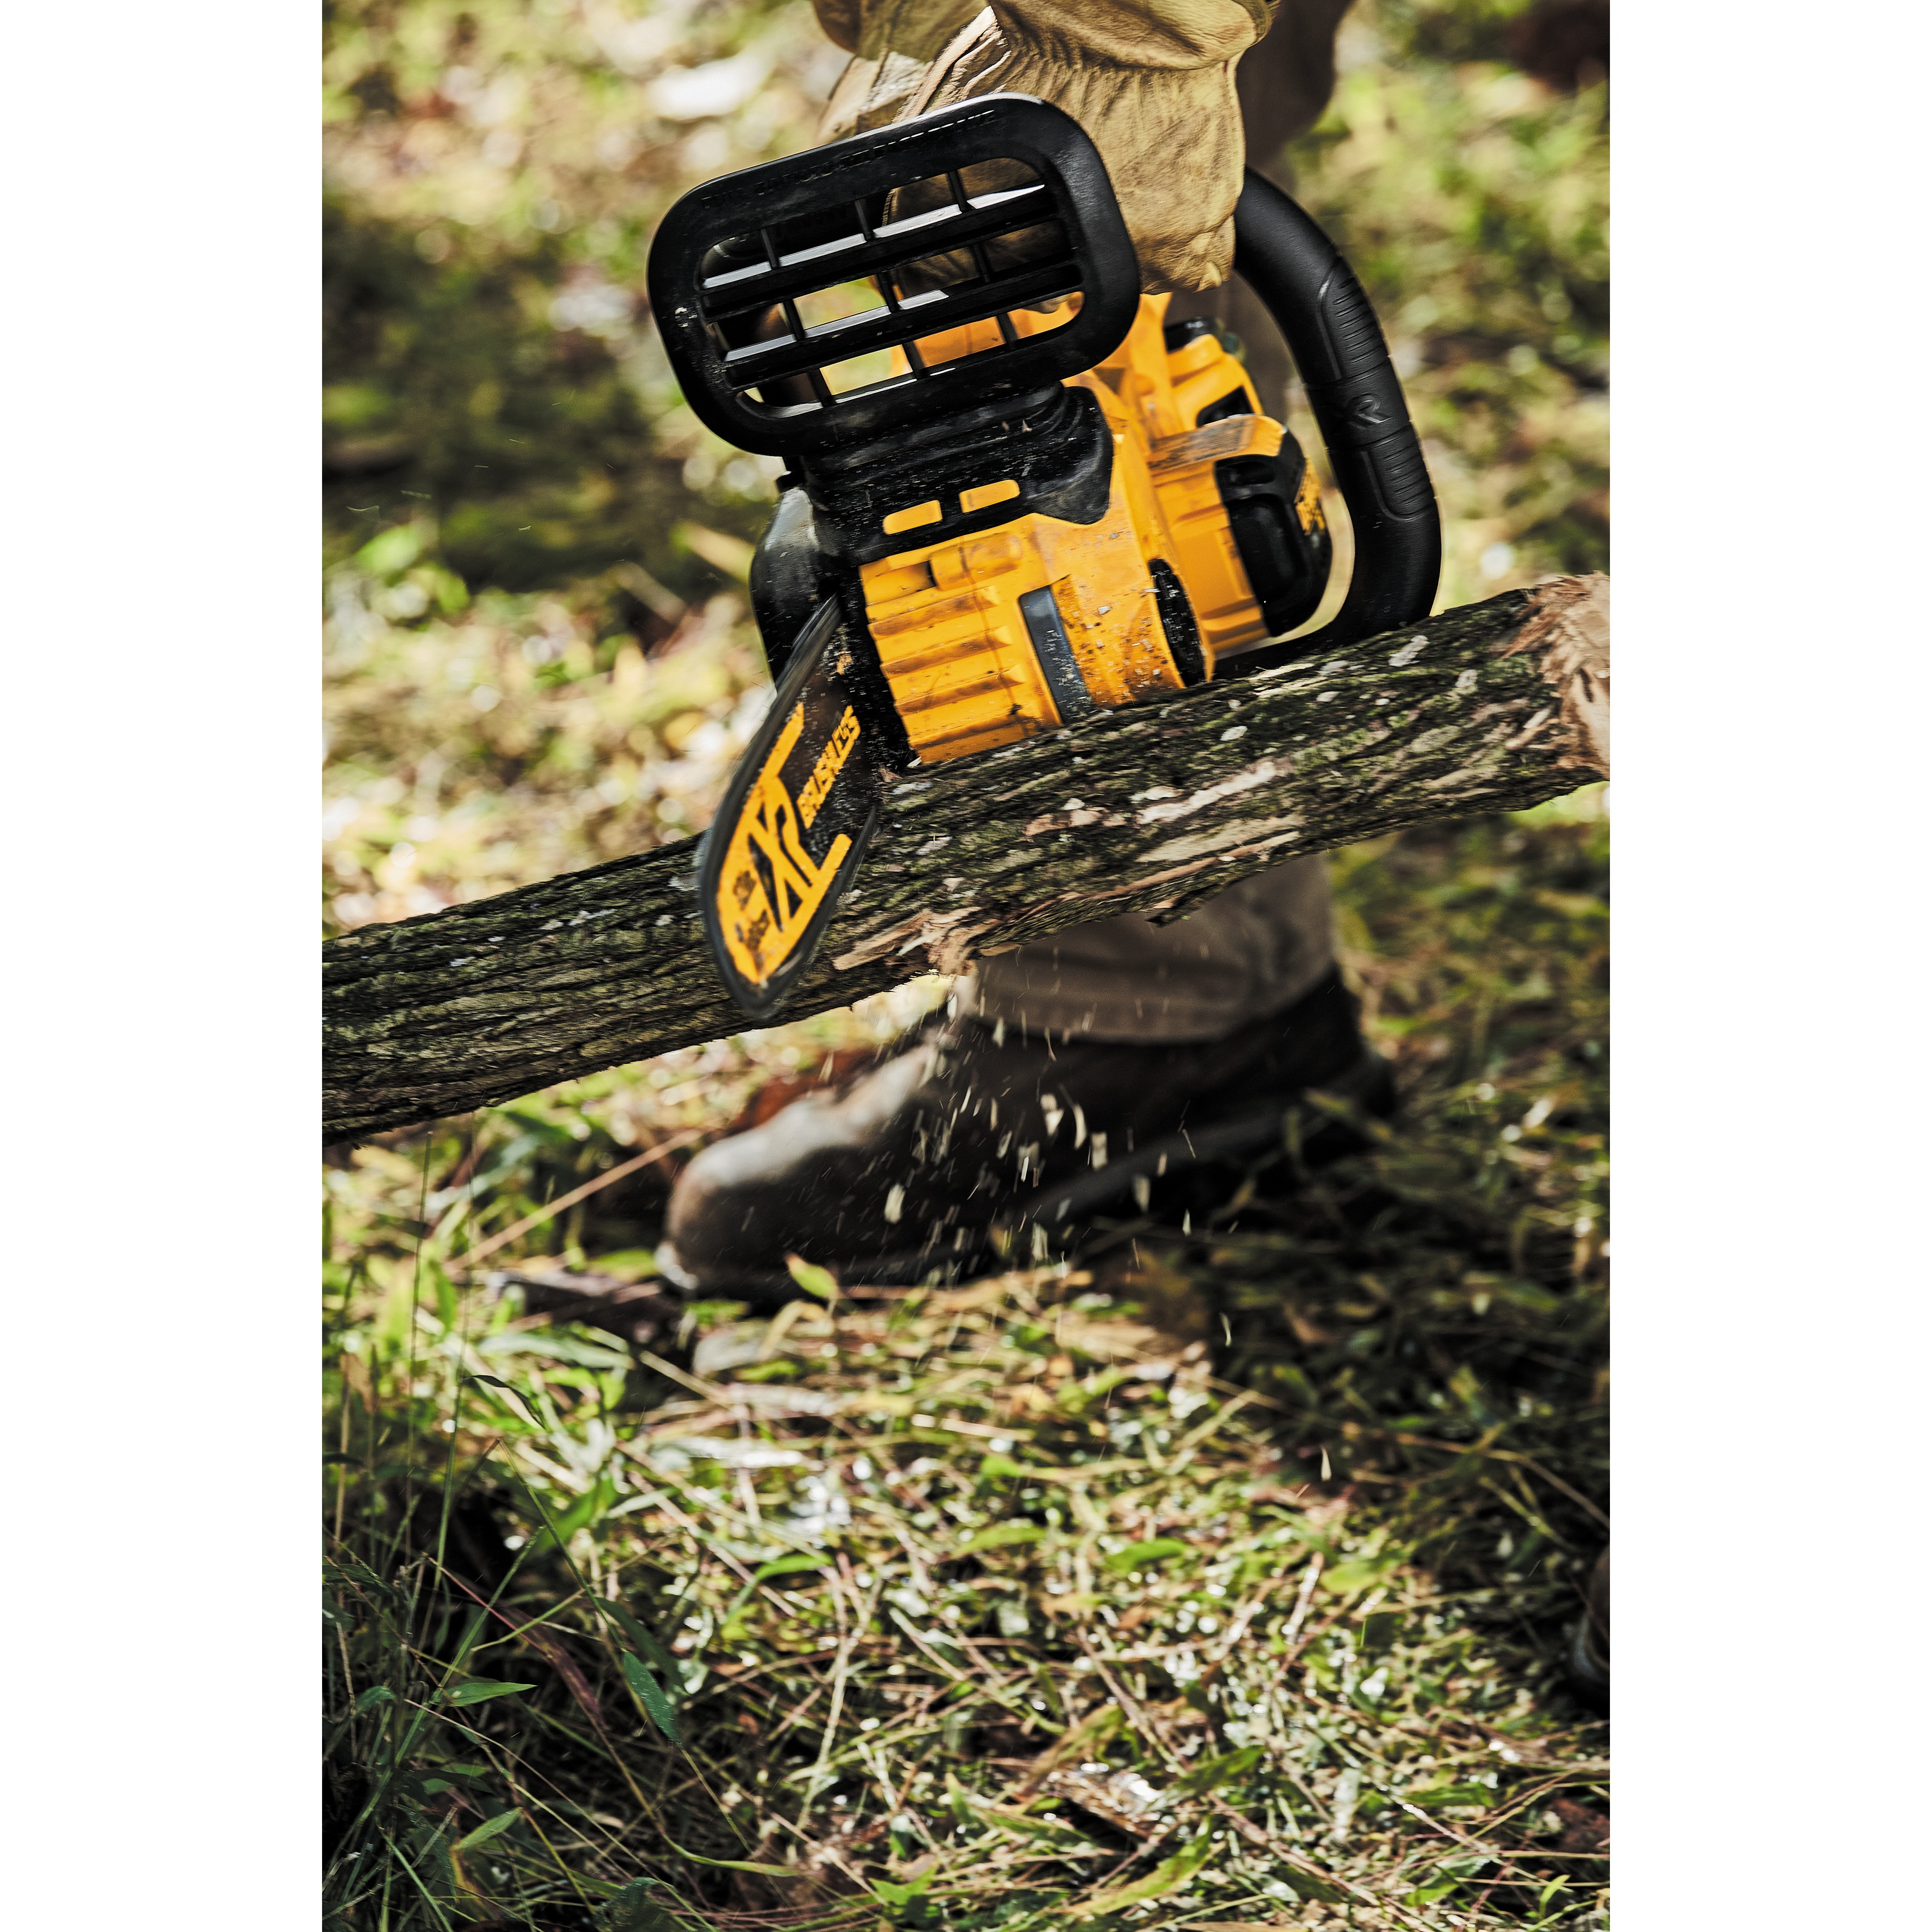 Close up of kick-back safety feature of FLEXVOLT Cordless Chainsaw 